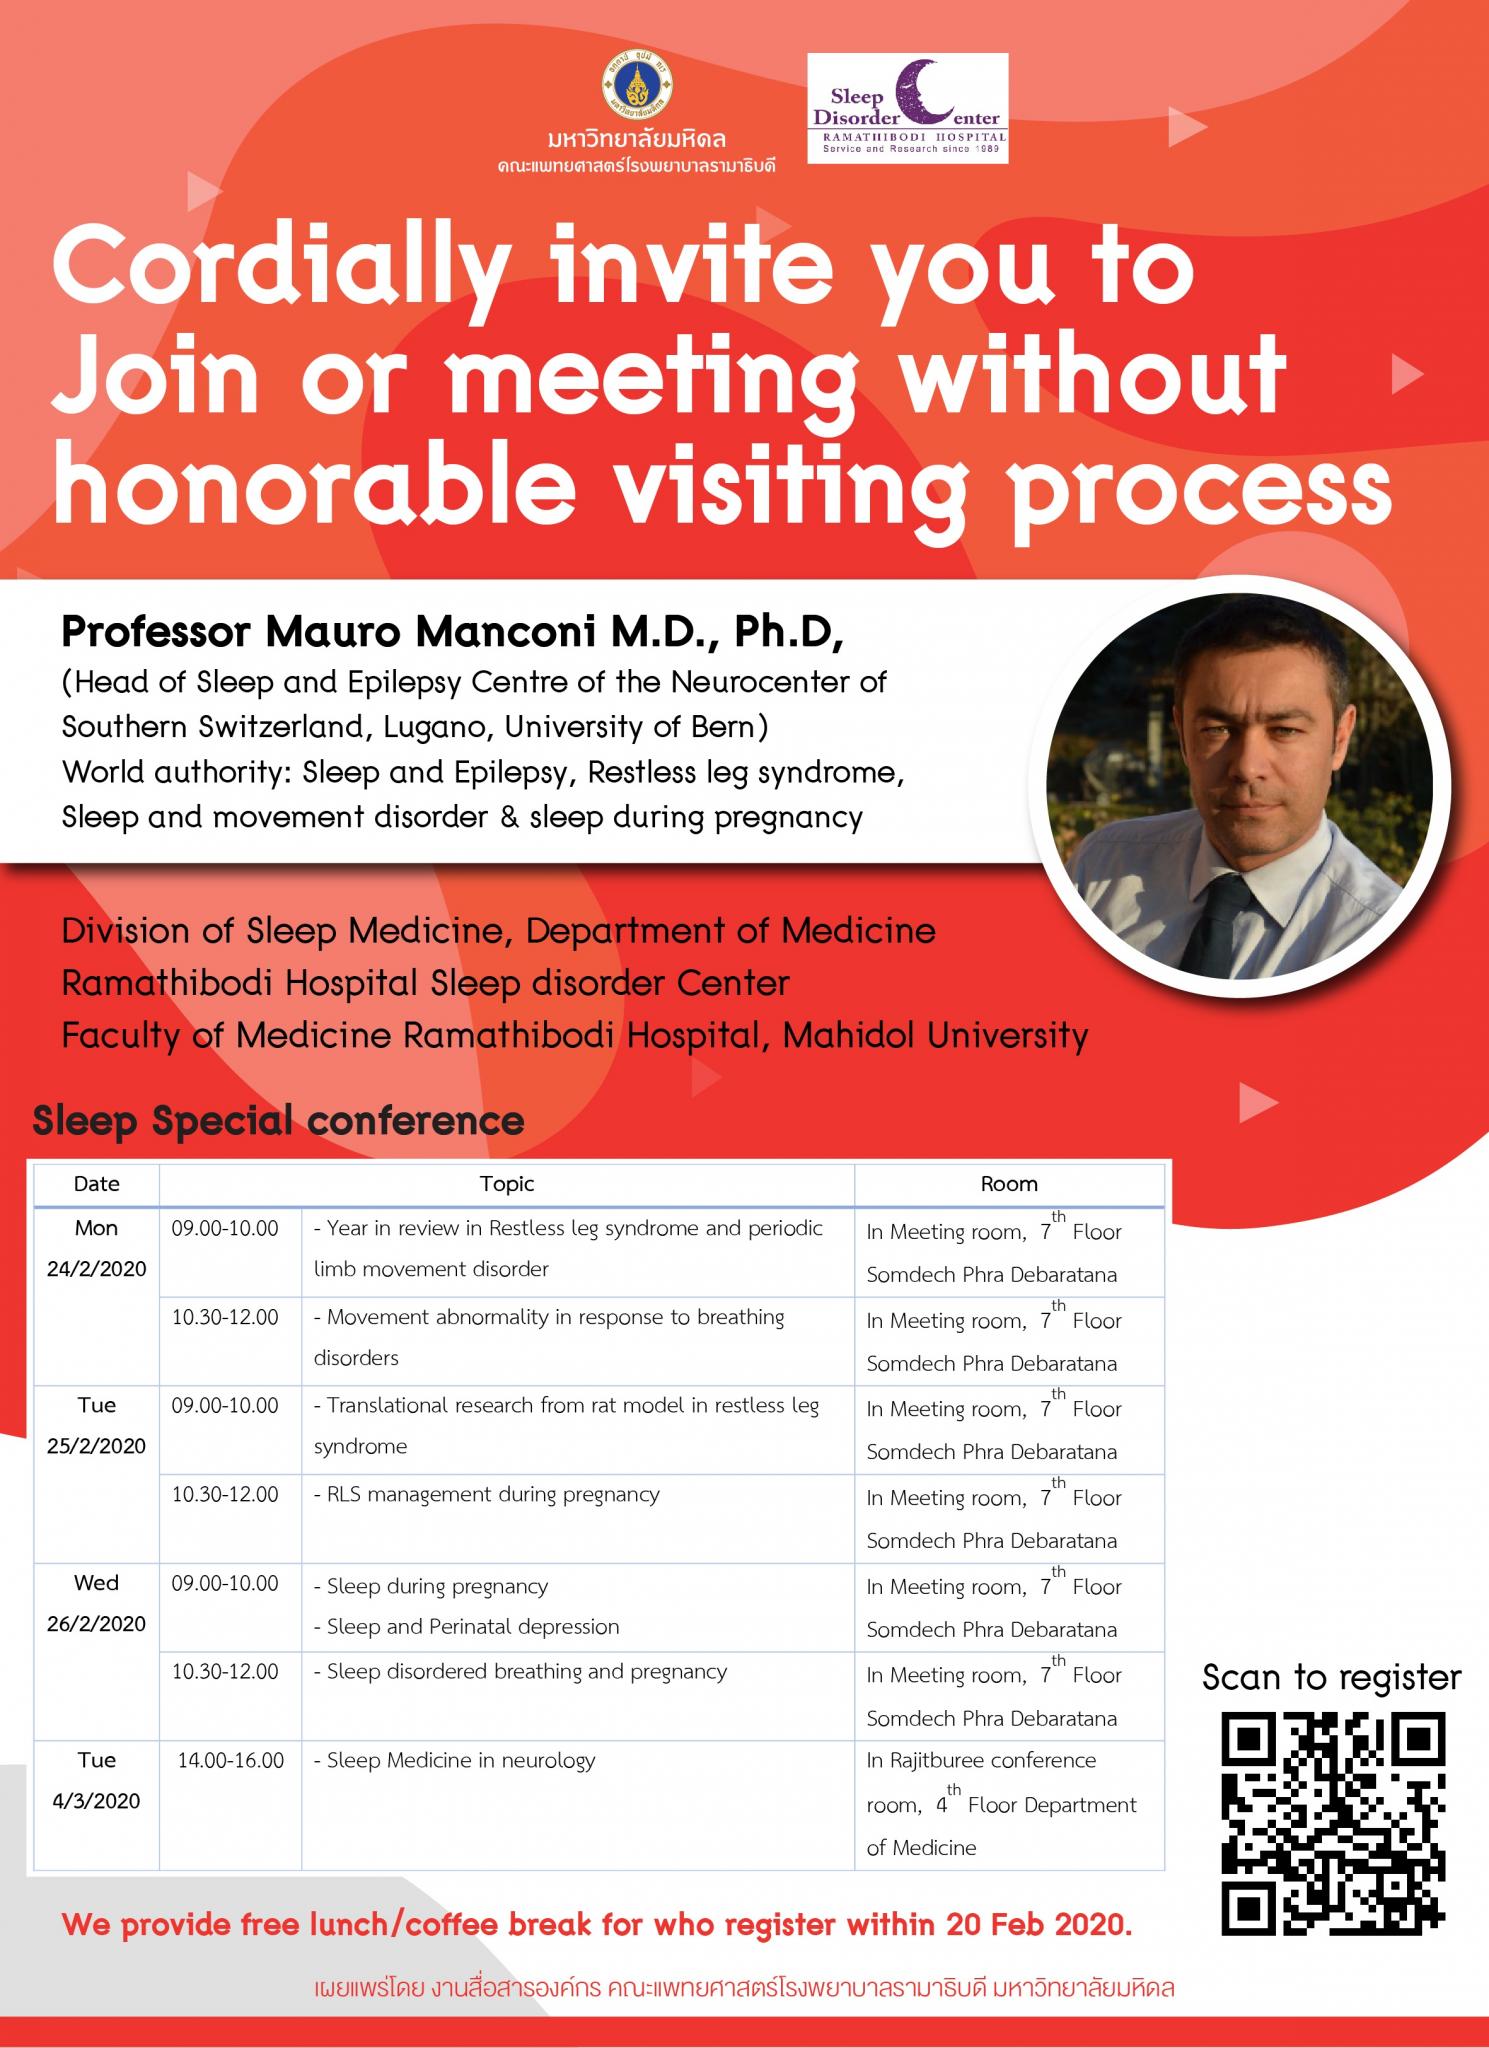 Cordially invite you to Join or meeting without honorable visiting process